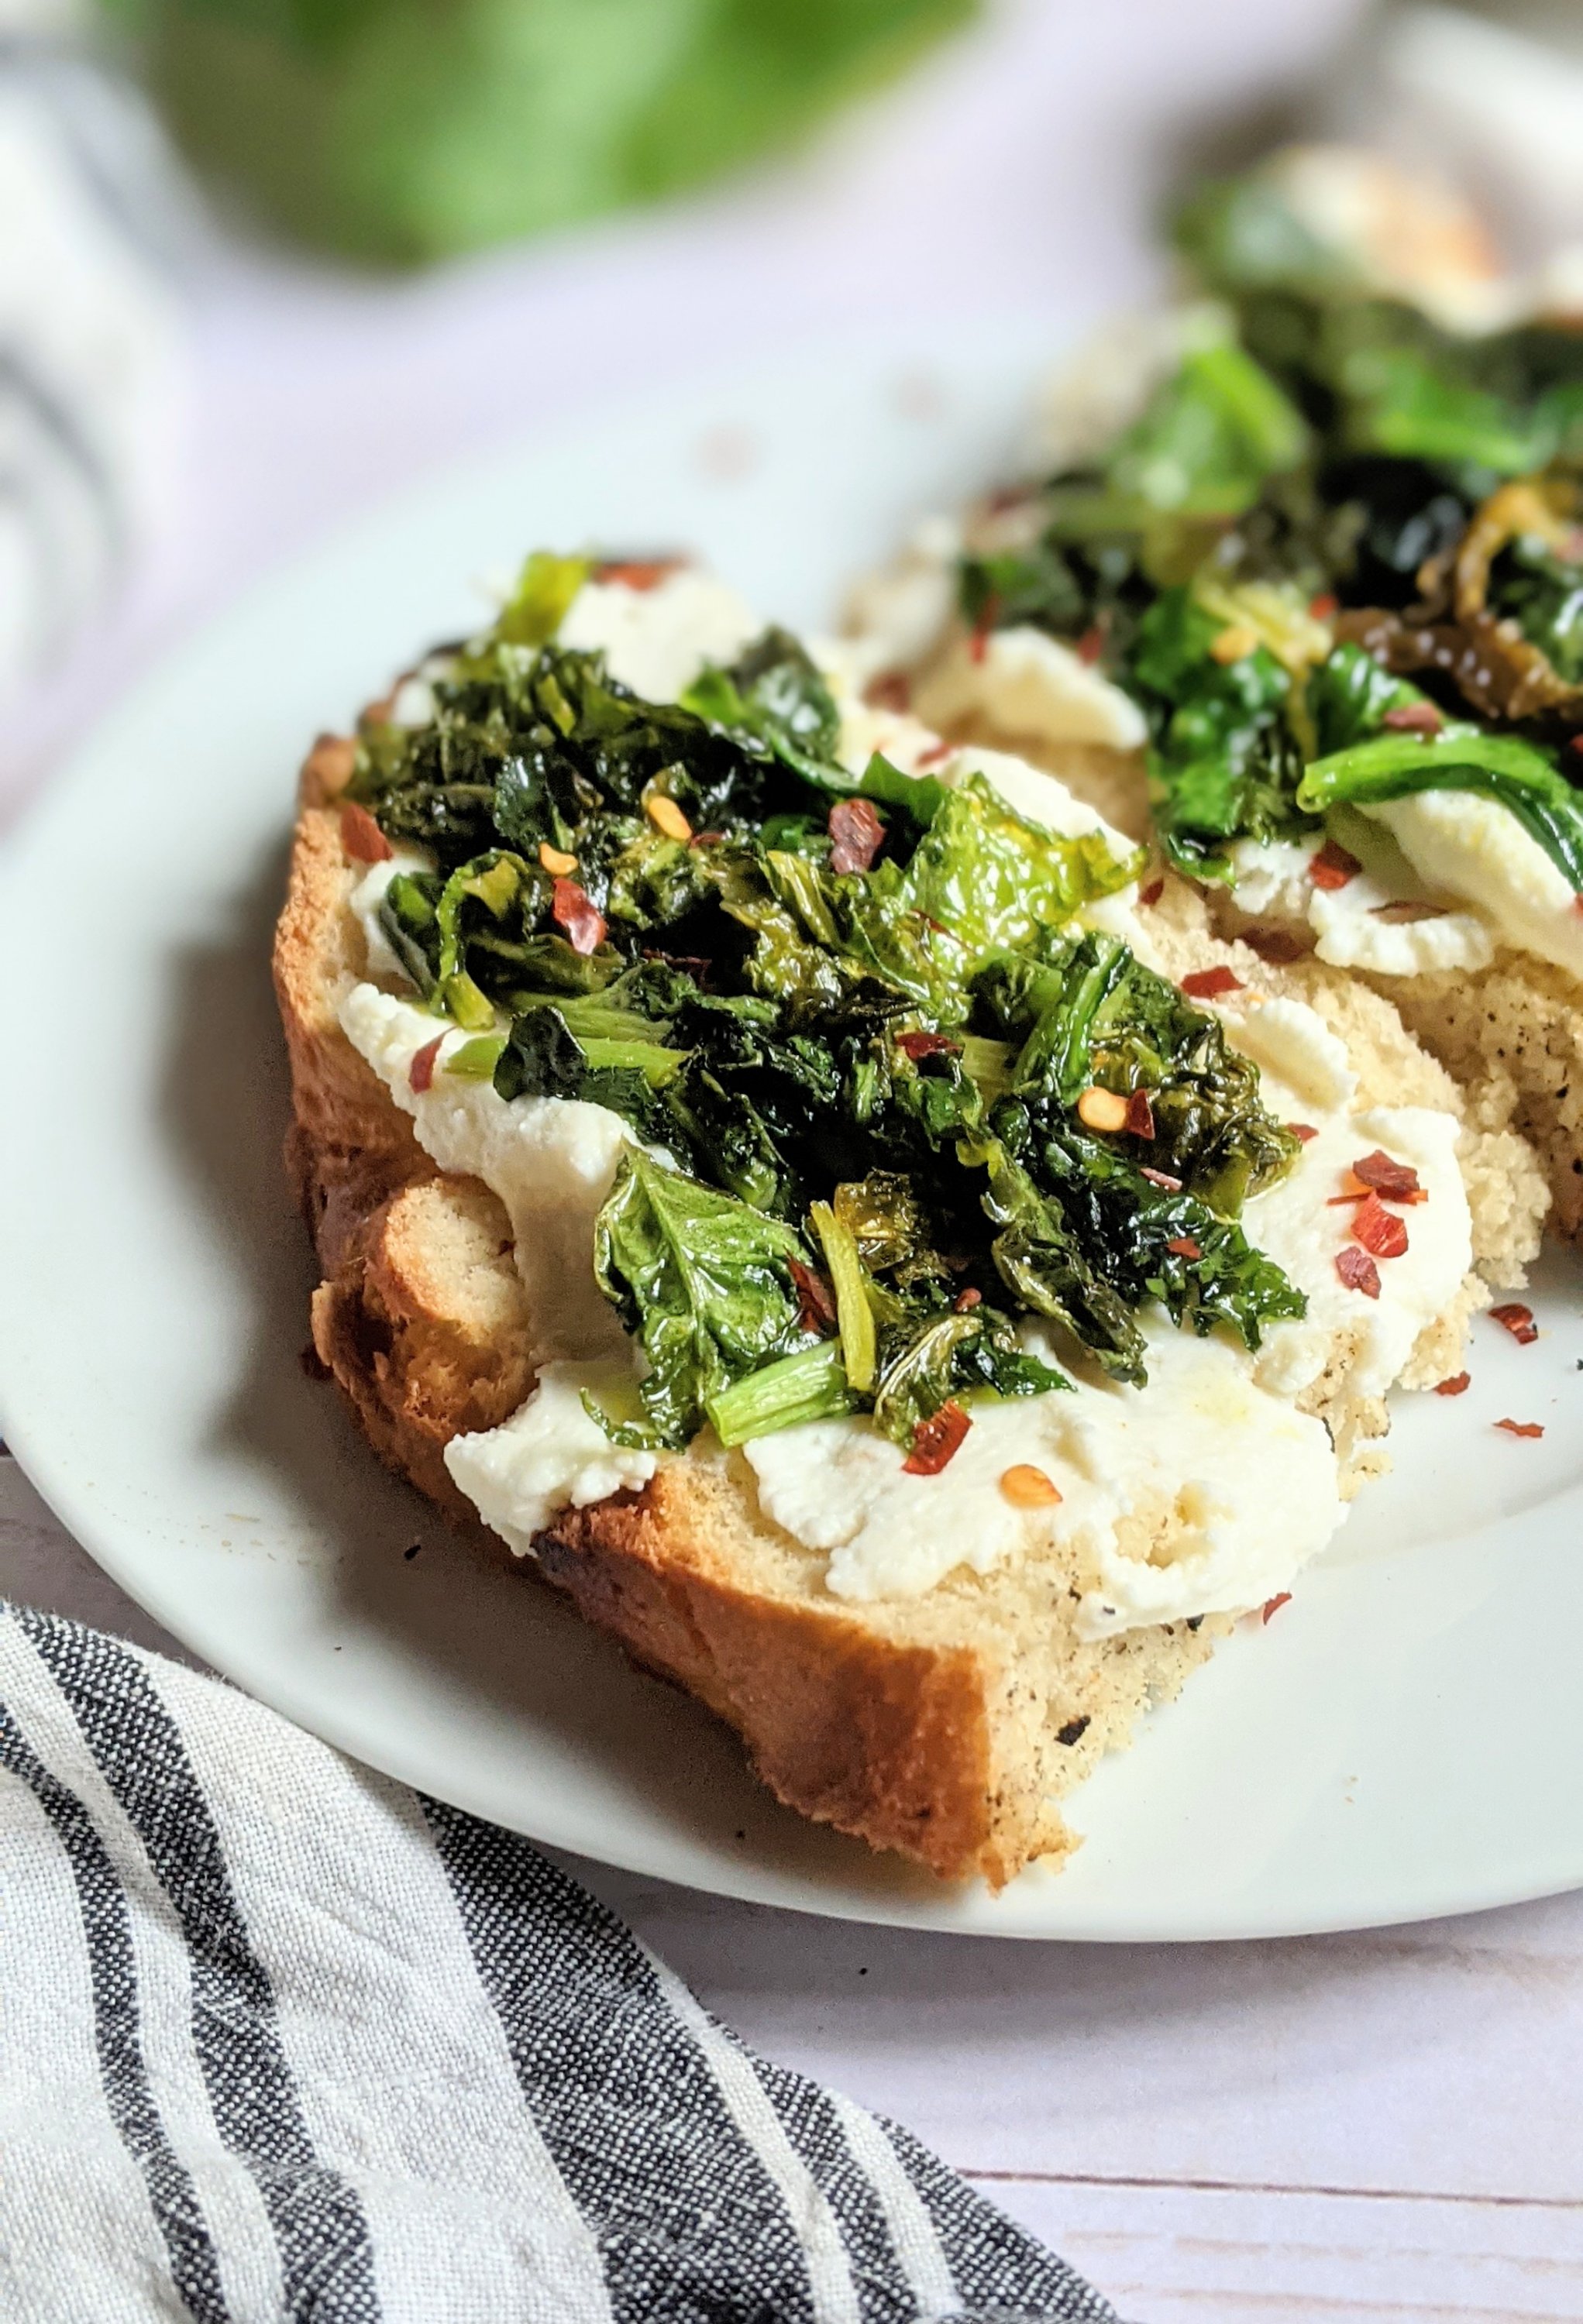 ricotta and kale toast recipe gluten free savory breakfast toasts can i eat kale for breakfast recipes with kale on toast creamy ricotta cheese and kale toast open faced sandwich breakfasts with kale in them healthy ways to eat kale in the morning